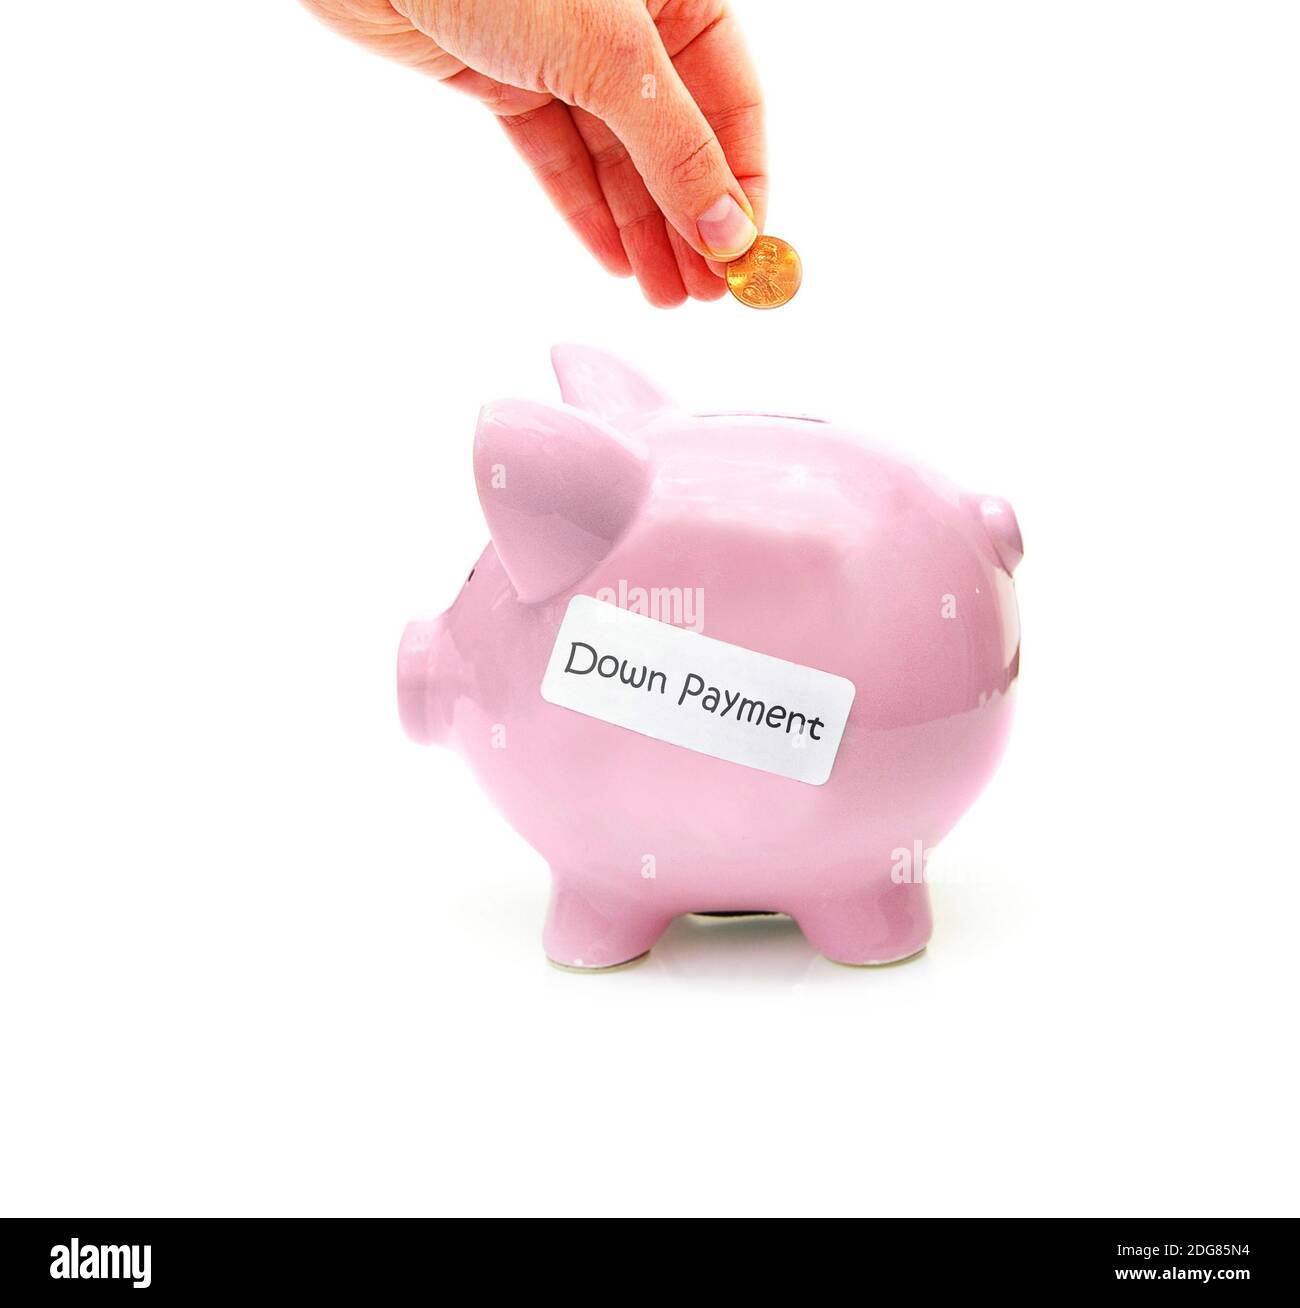 House down payment Stock Photo